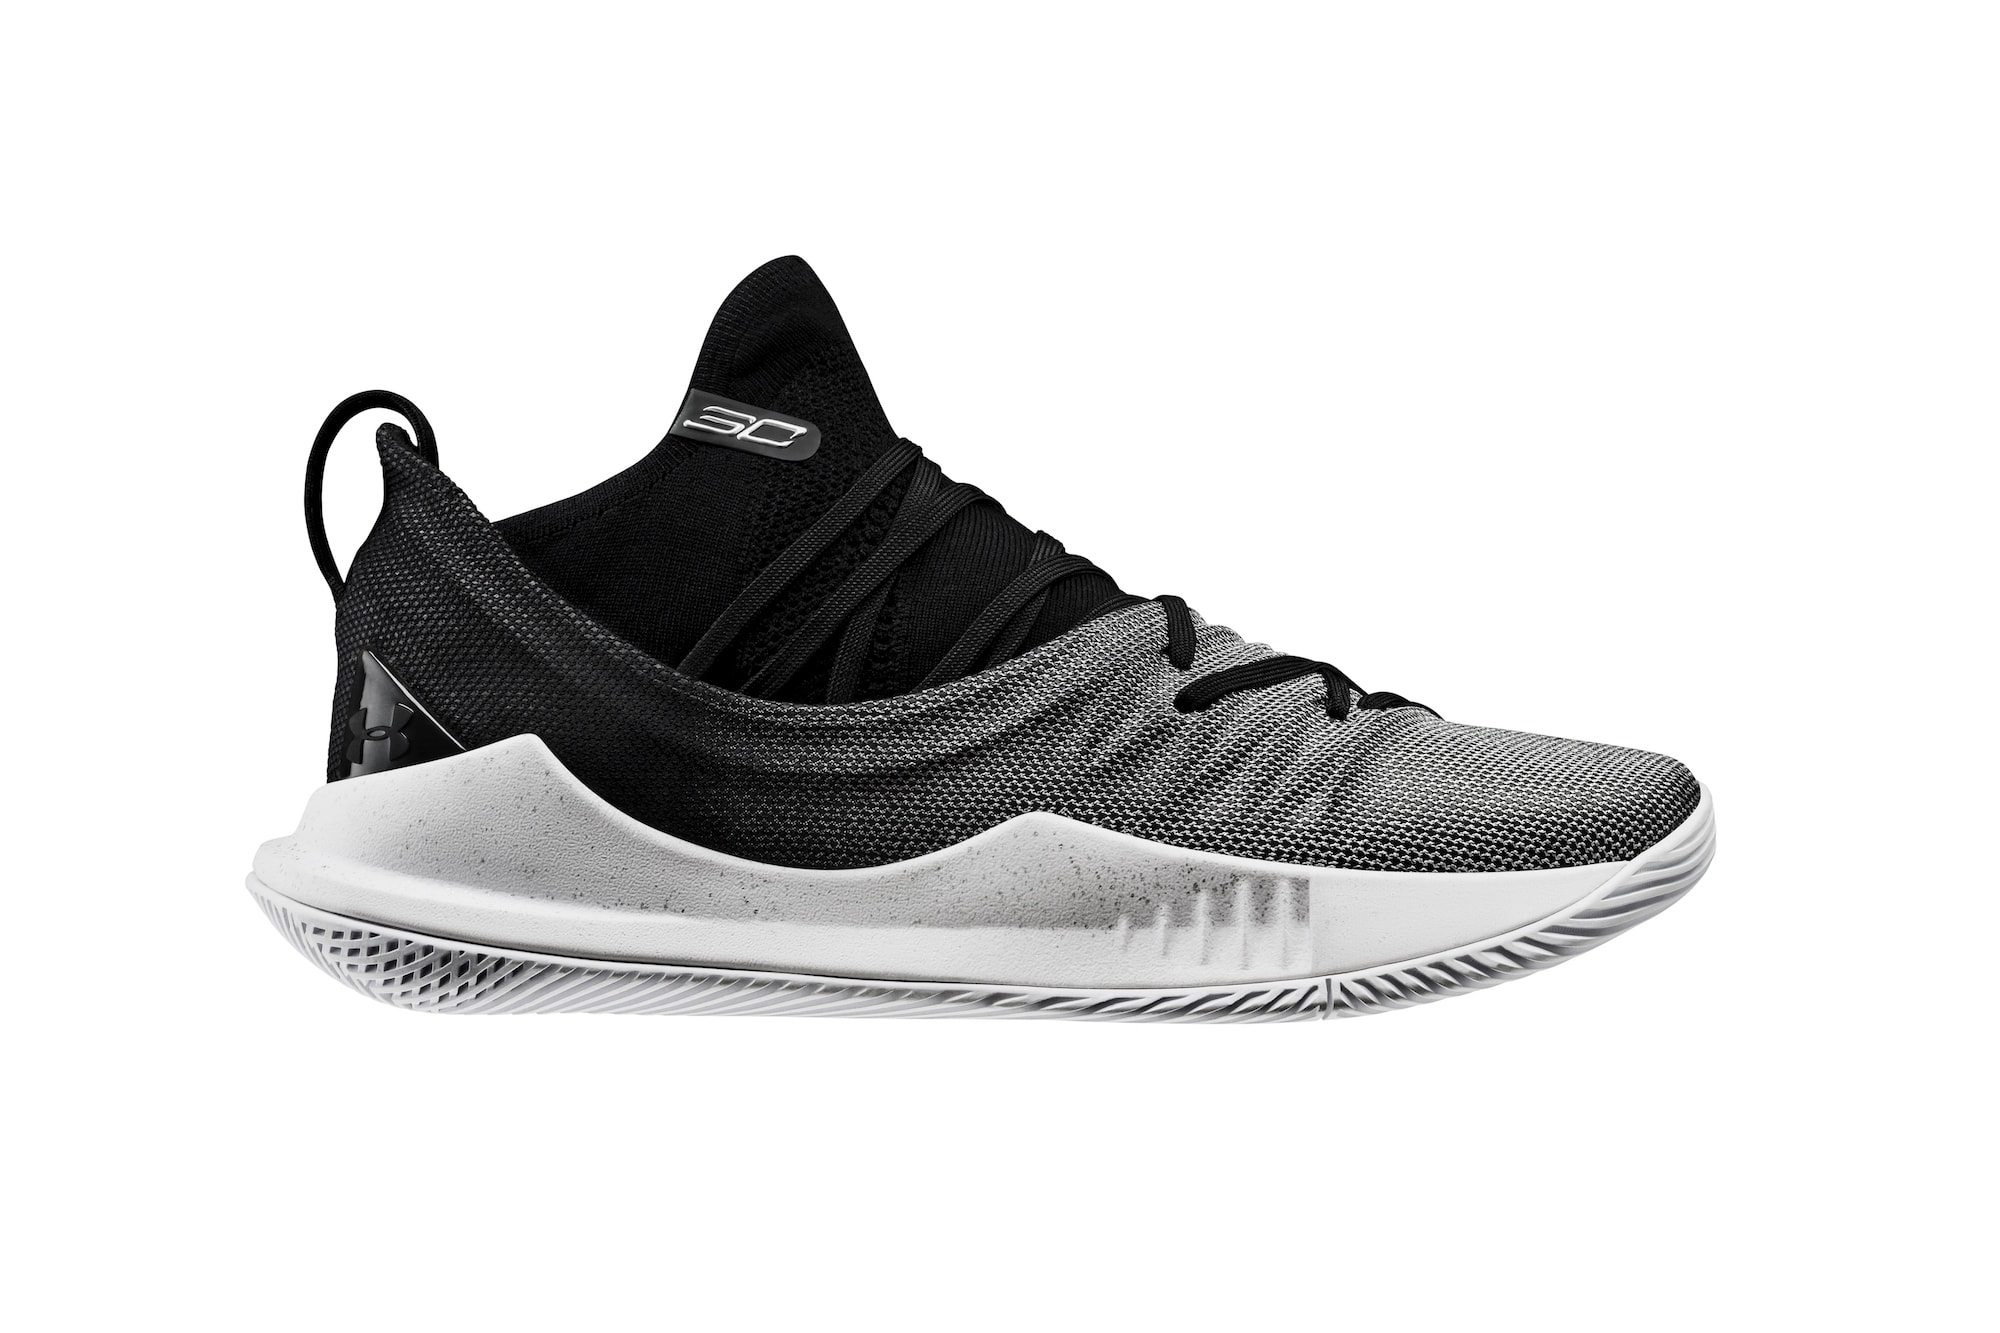 Under Armour Curry 5 全新黑白配色登場